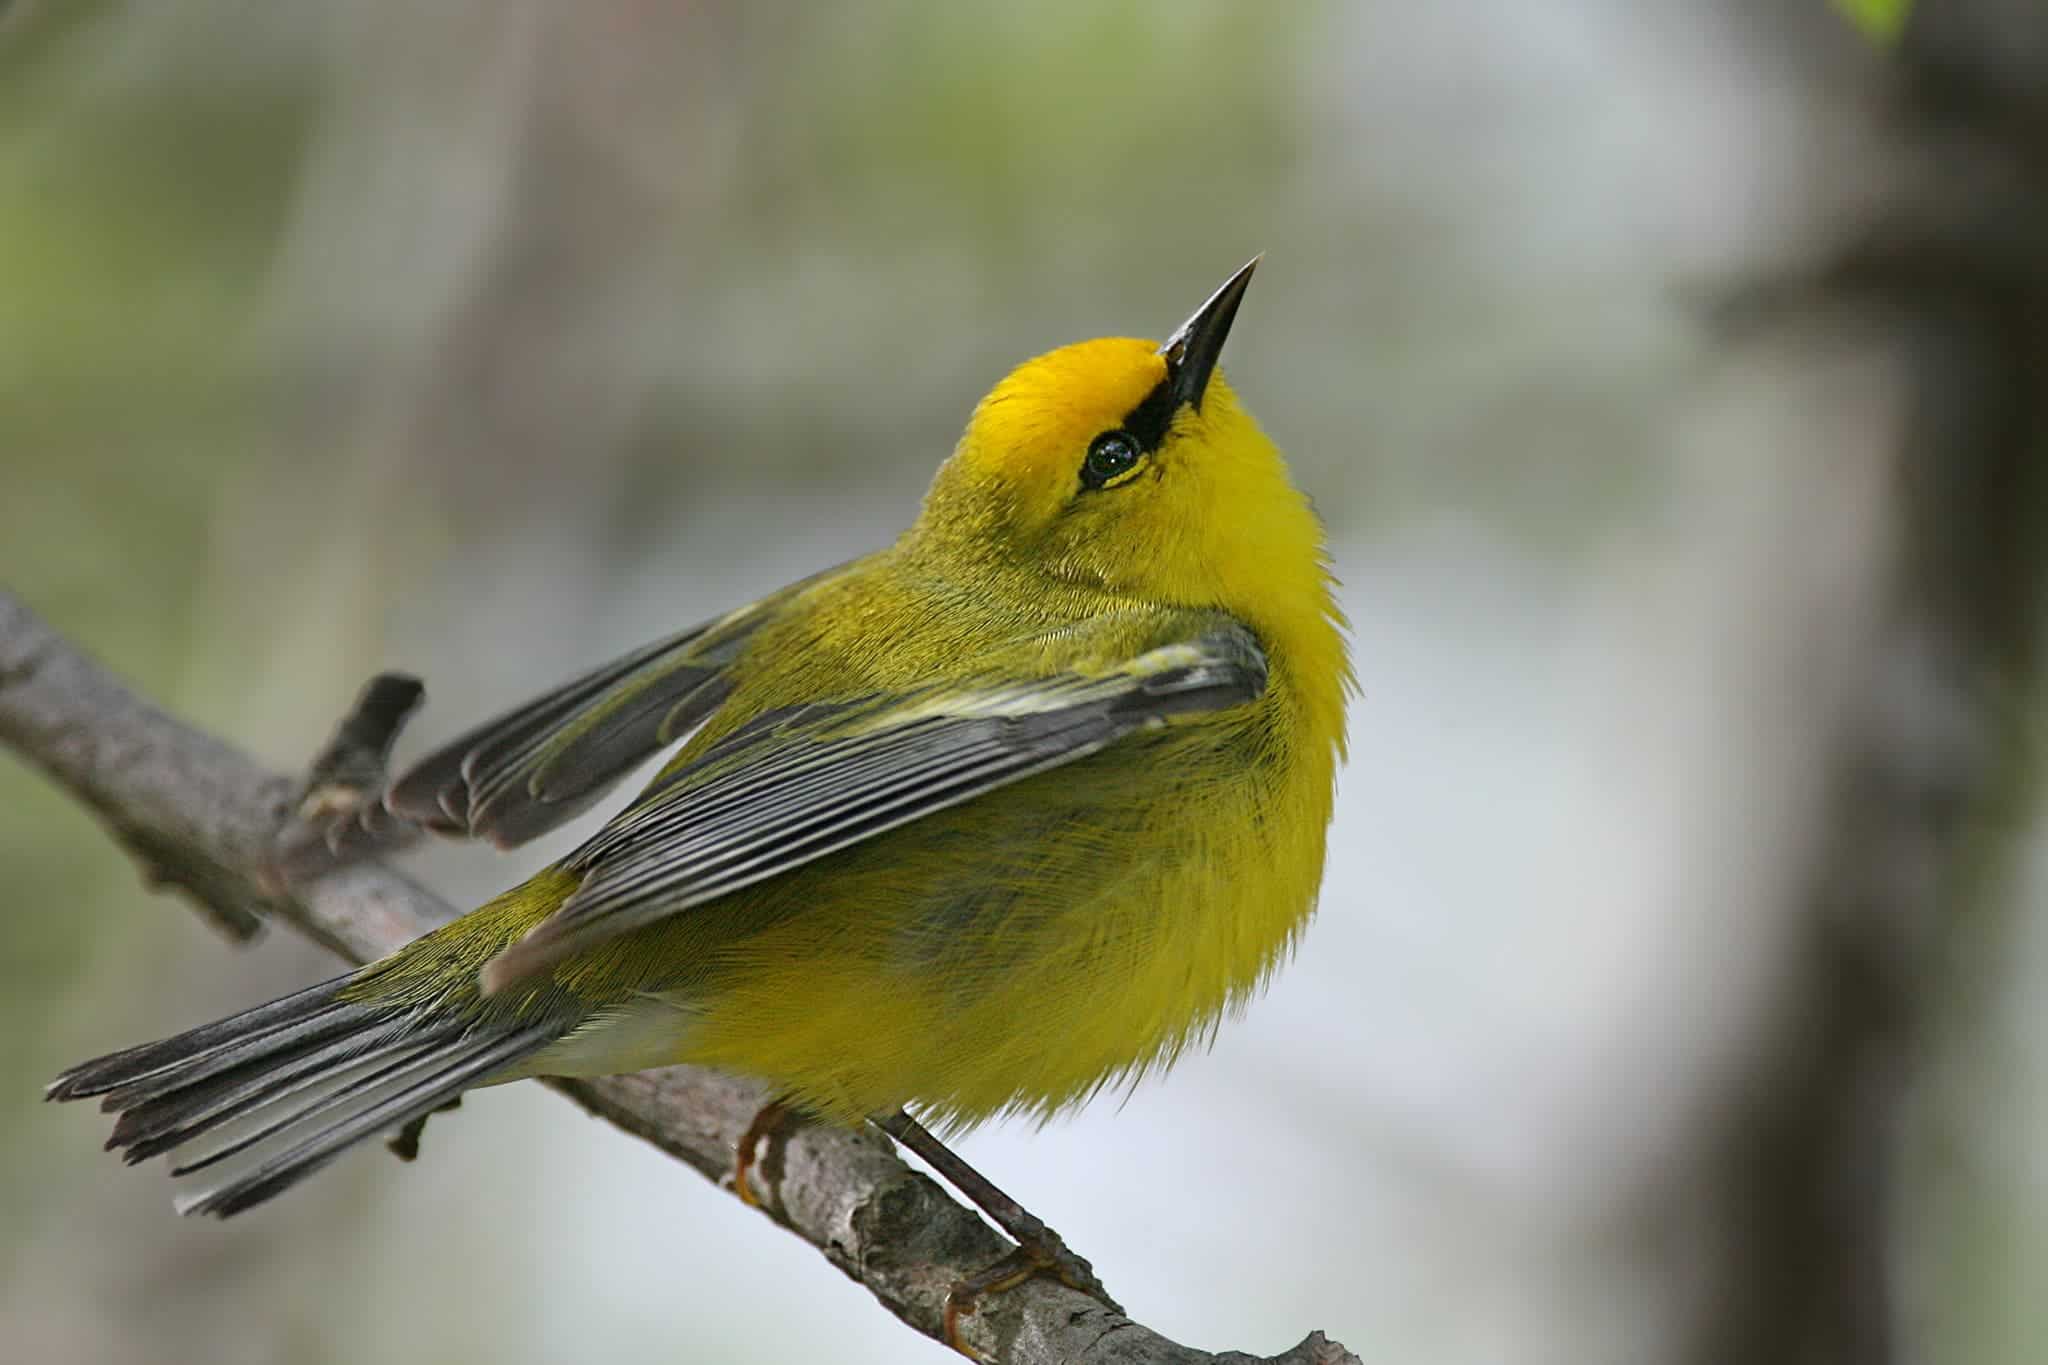 The Blue-winged warbler is one of the North-American birds which can't adapt to the new climate change conditions. Image credits: Wwcsig.